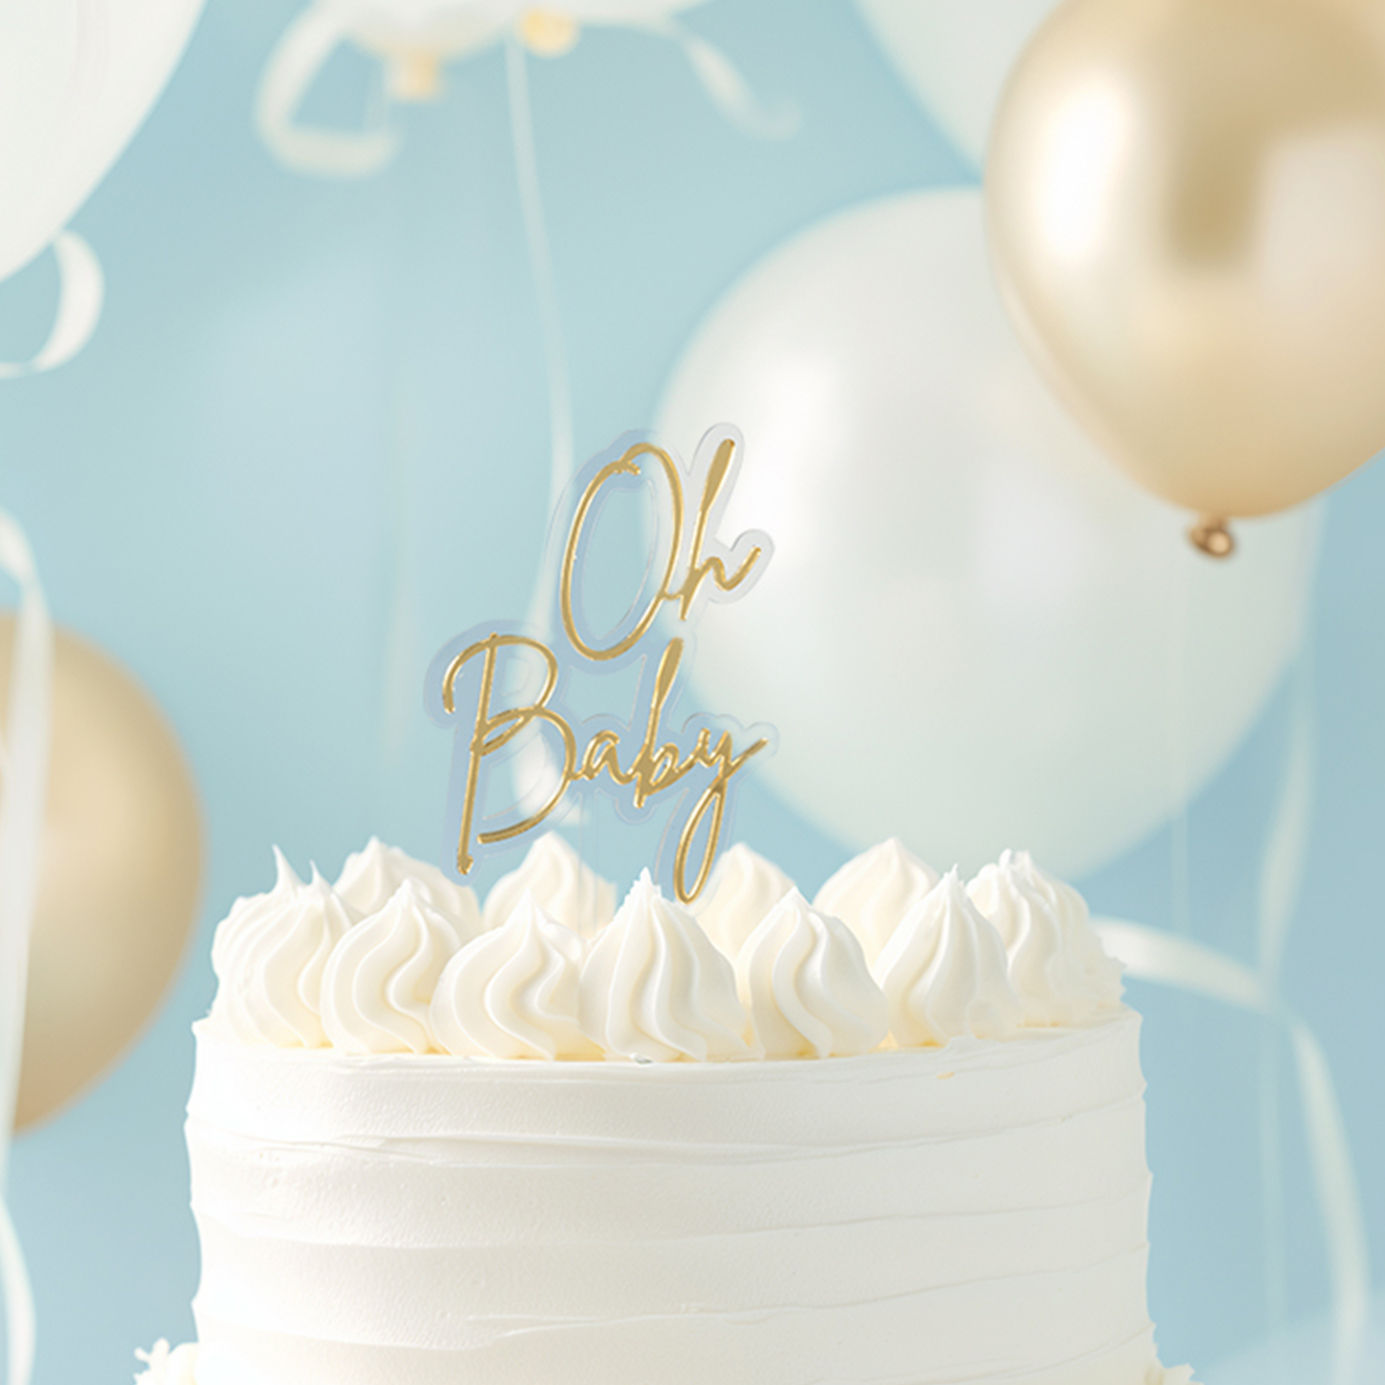 GOLD / CLEAR Layered Cake Topper - OH BABY